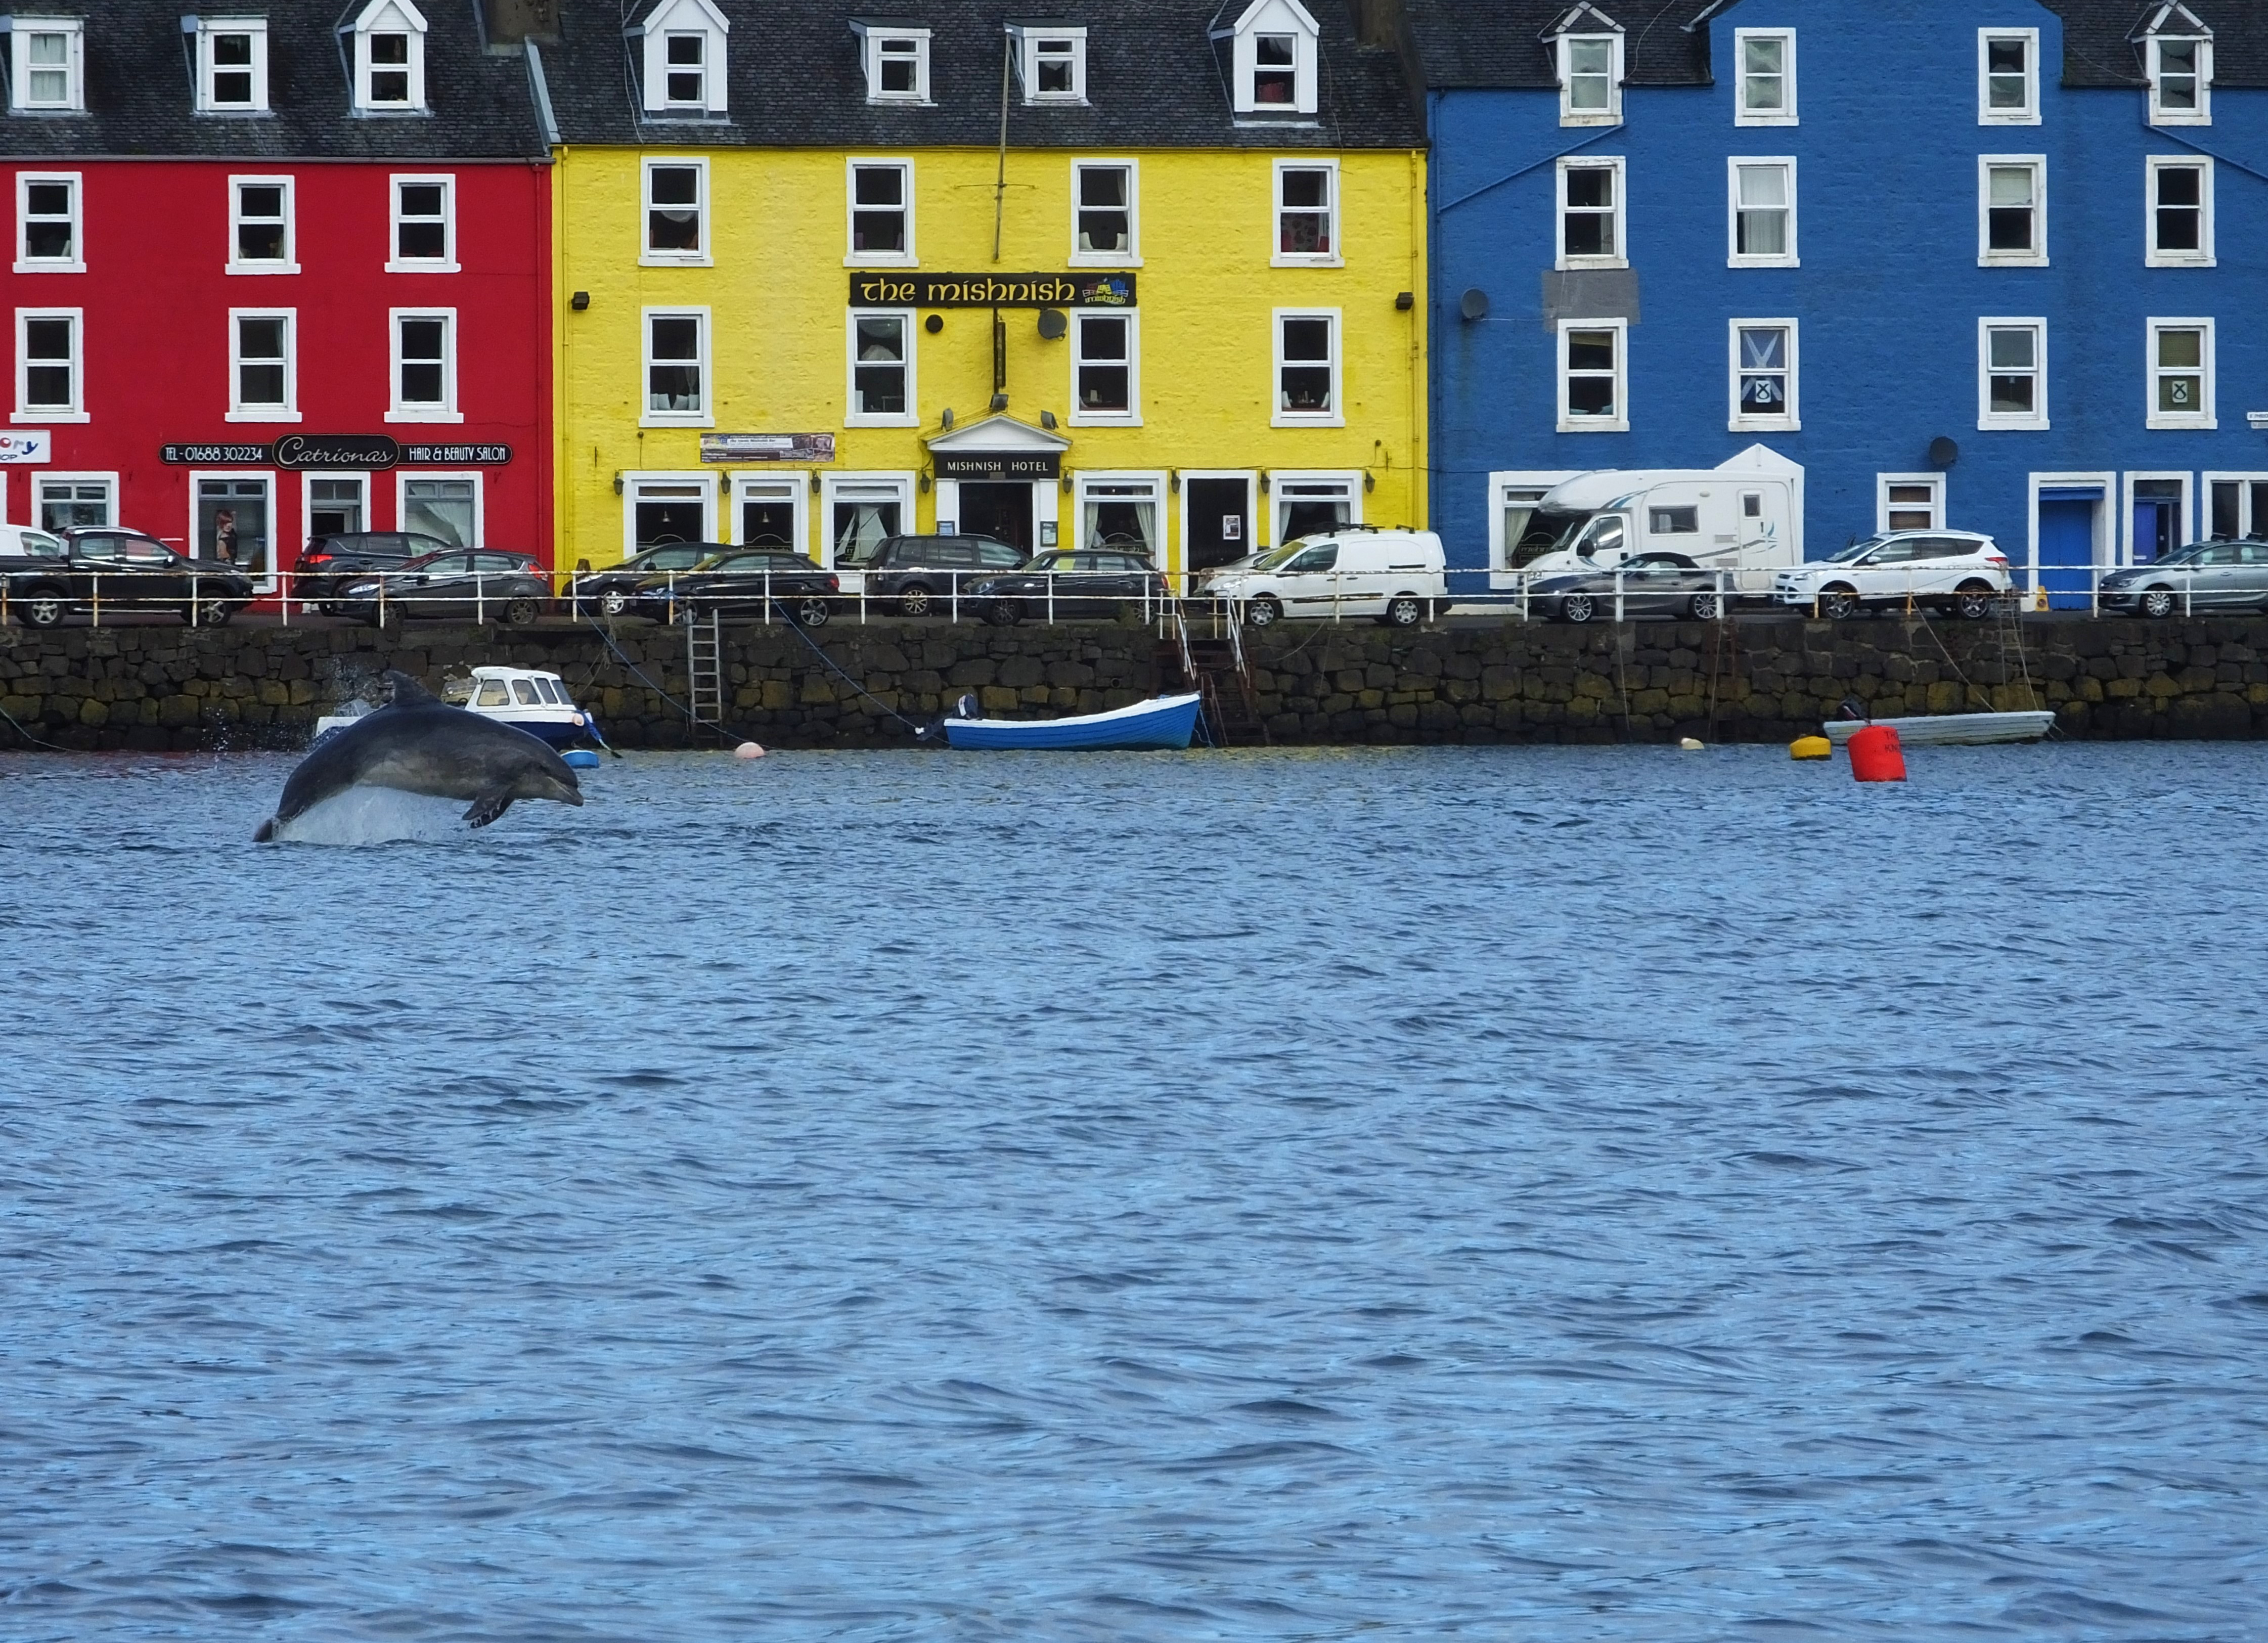 A dolphin leaping near Tobermory